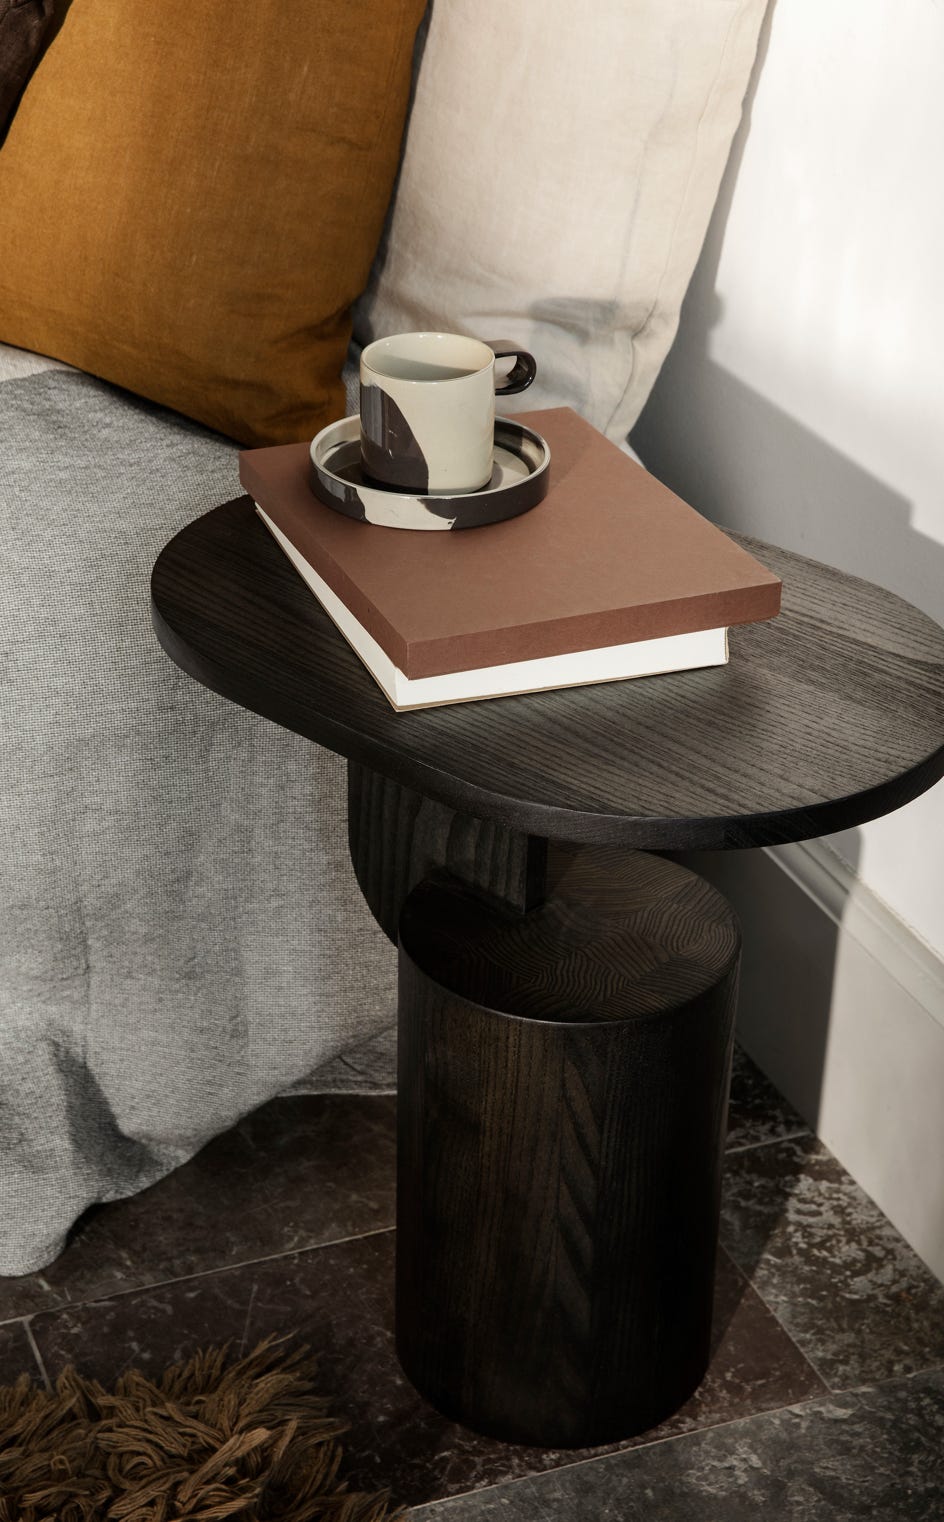 Insert coffee table and side table